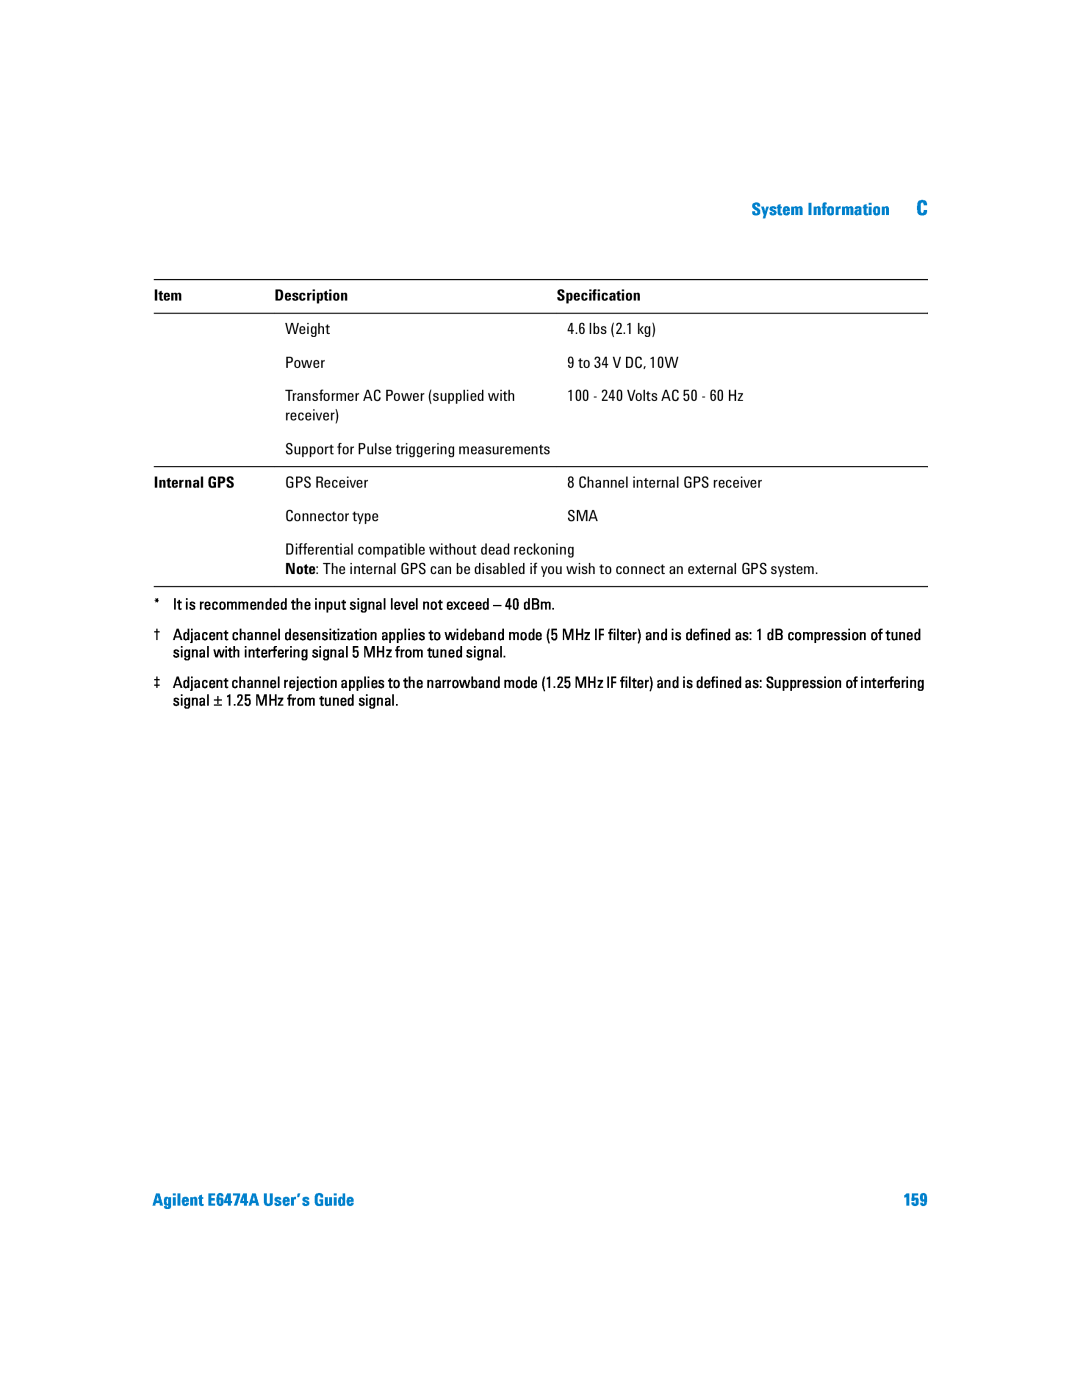 Agilent Technologies manual System Information, Agilent E6474A User’s Guide, Support for Pulse triggering measurements 